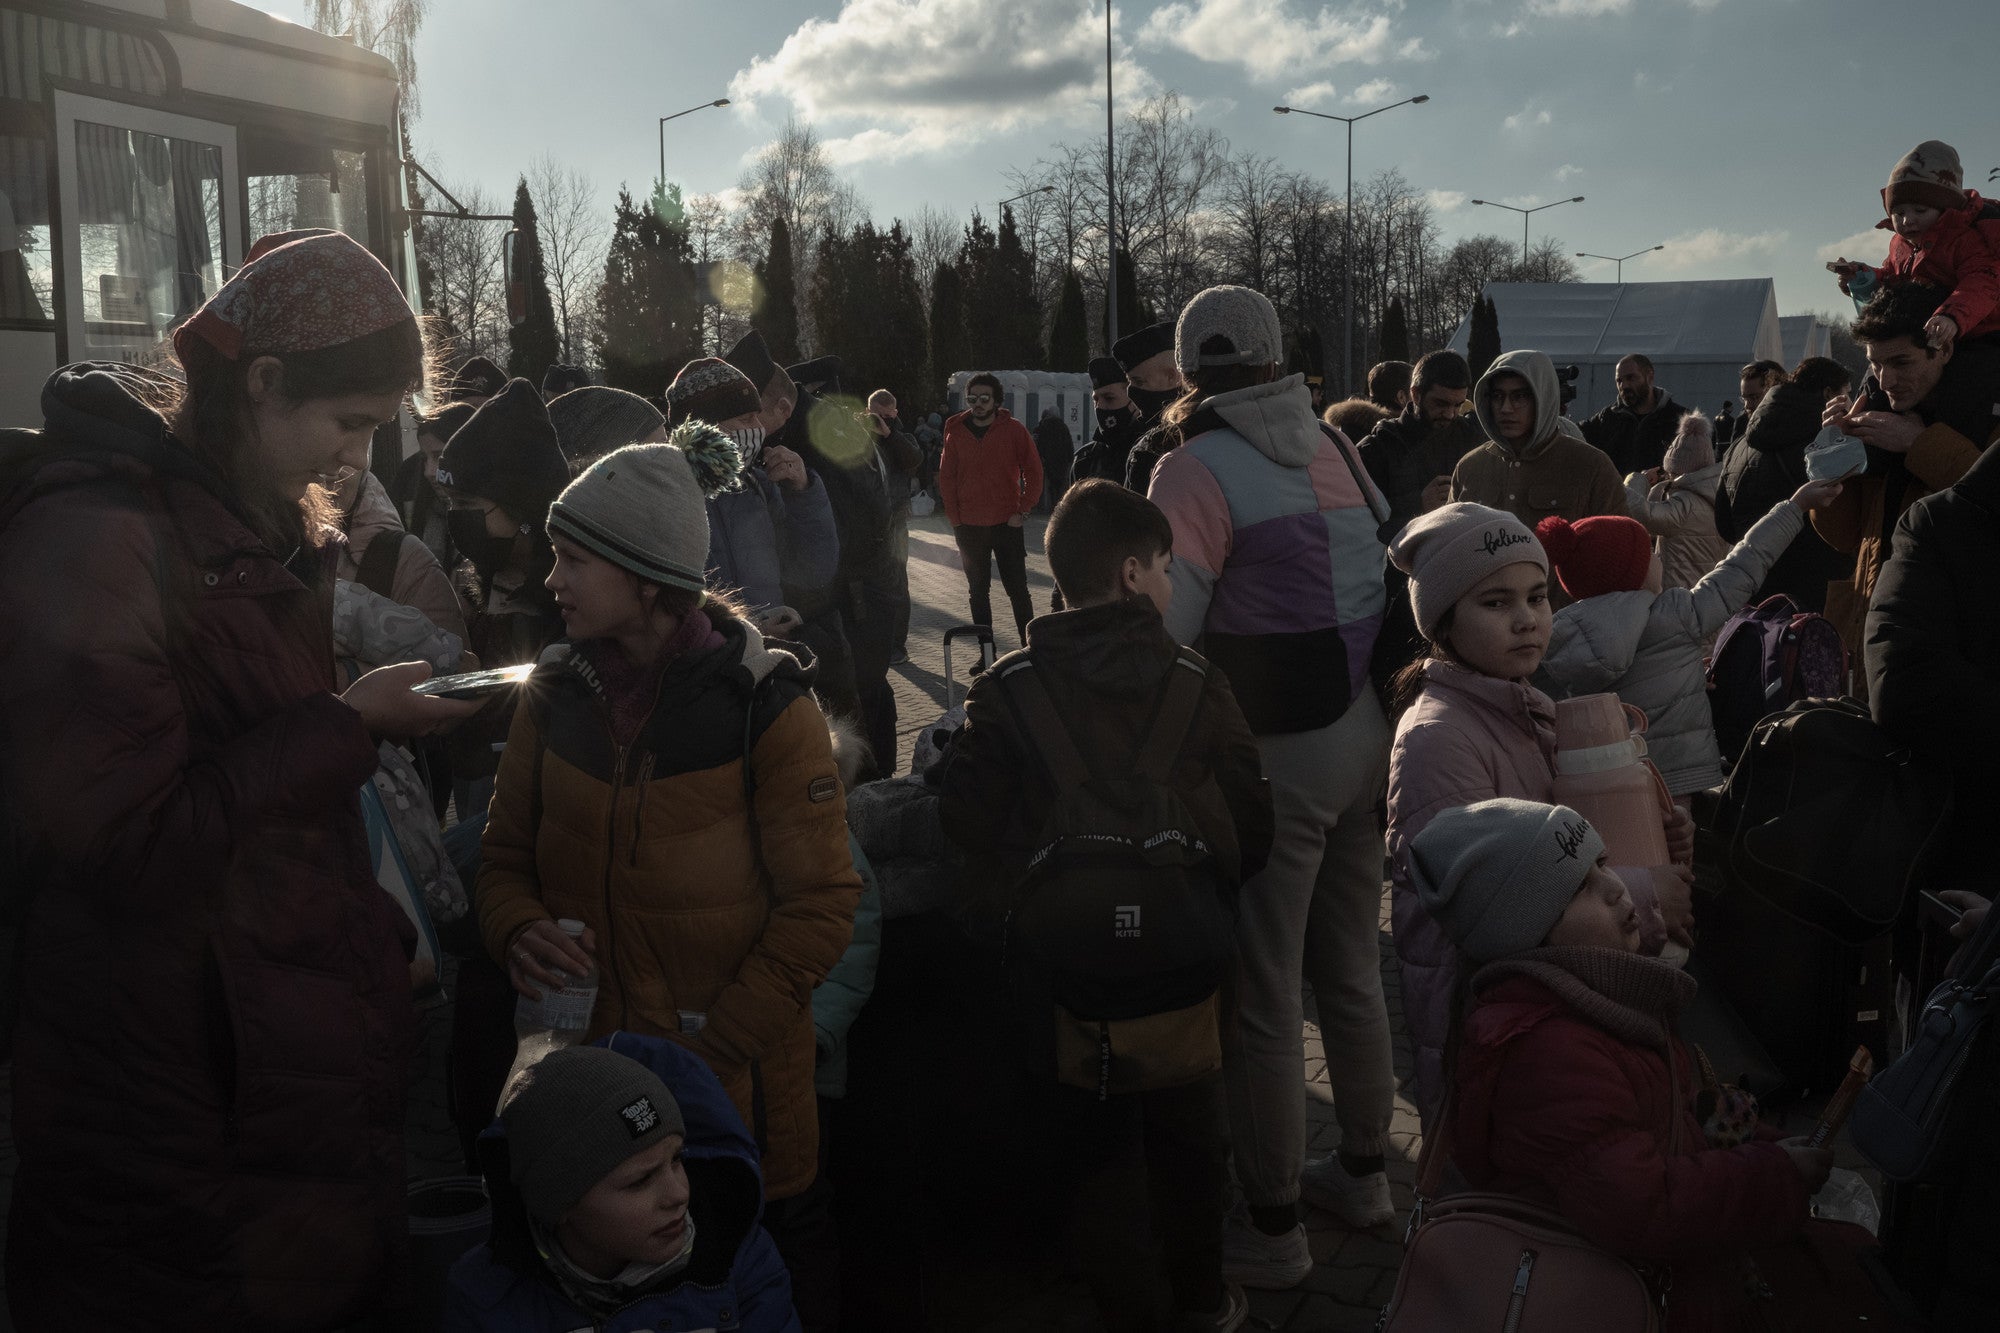 Polish volunteers and authorities provide help for Ukrainian refugees as they arrive in Mlyny reception point with buses from the border crossing, in Przemsyl, eastern Poland.